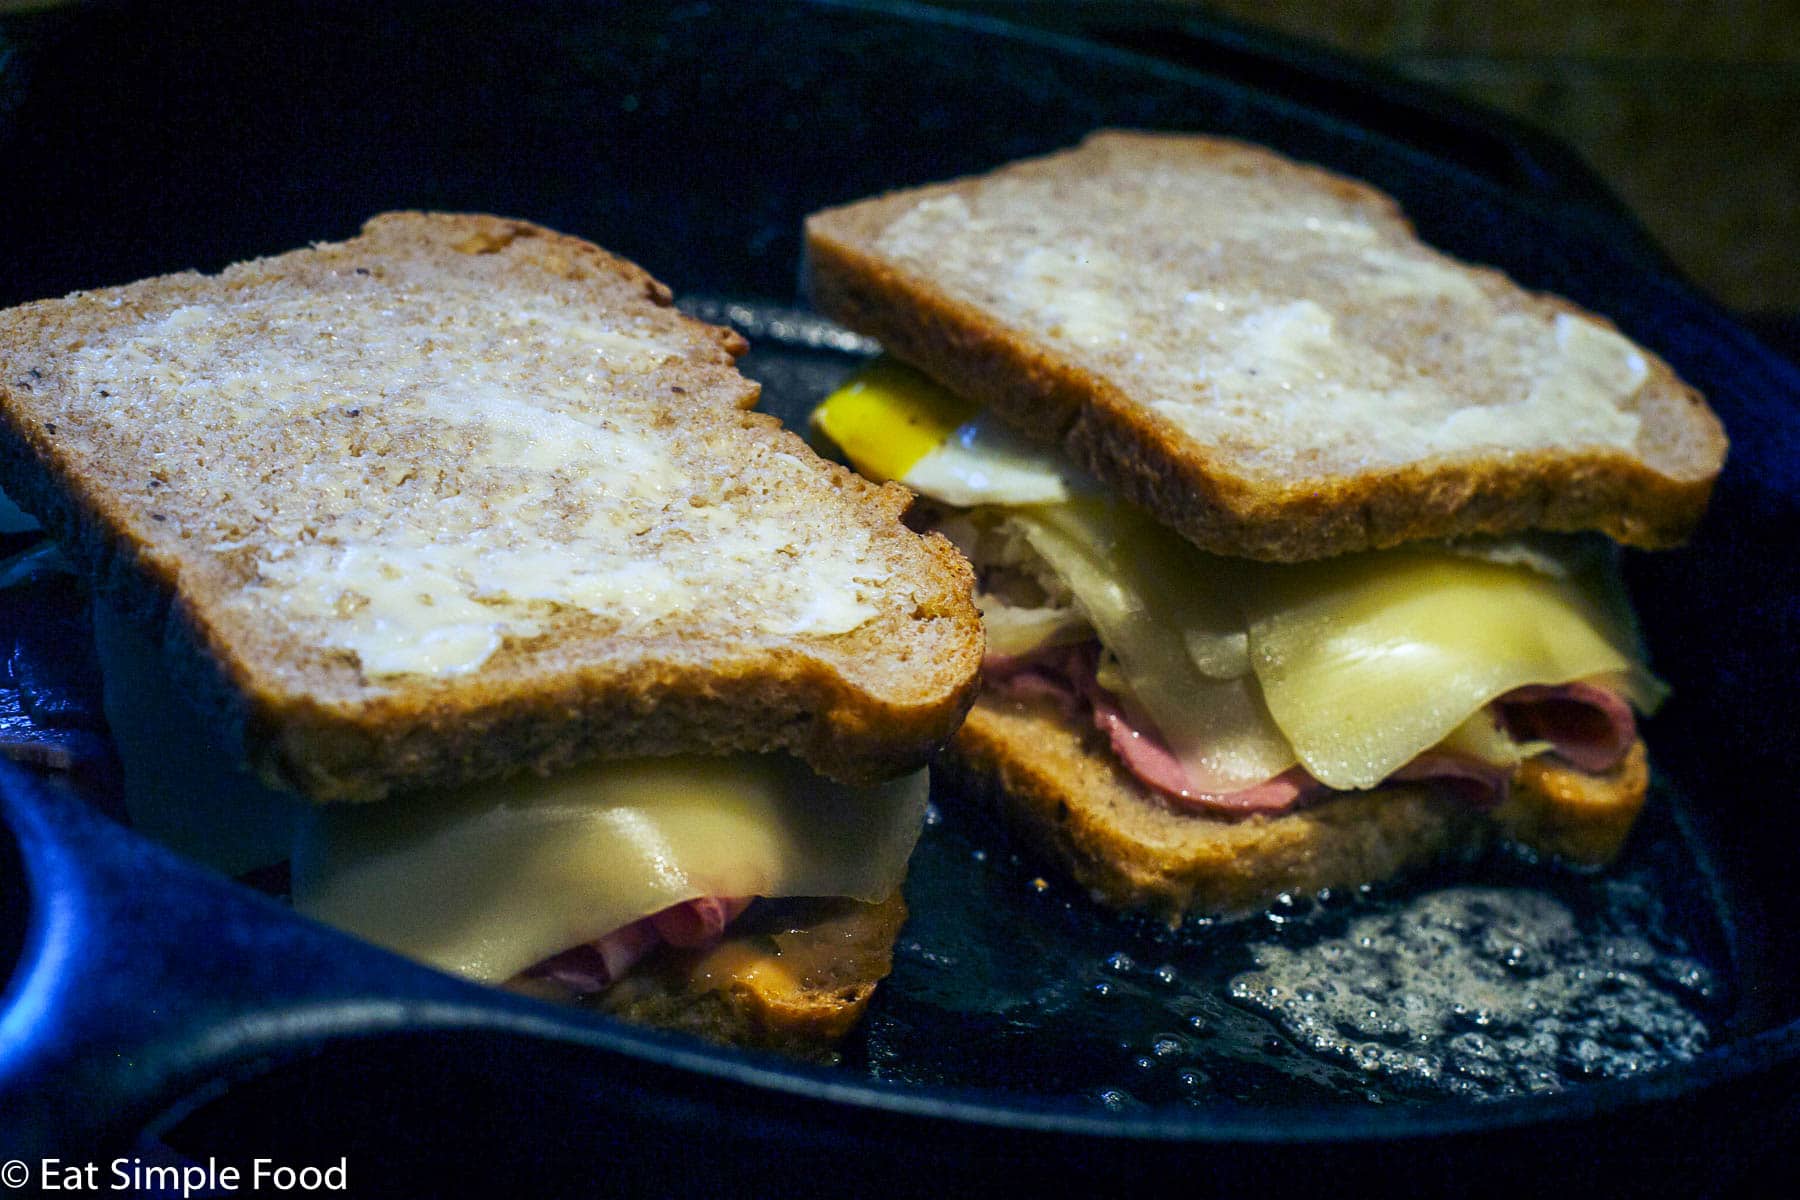 2 sandwiches being pan fried in a black cast iron skillet. The bread is buttered on the outside and white swiss cheese is melting.